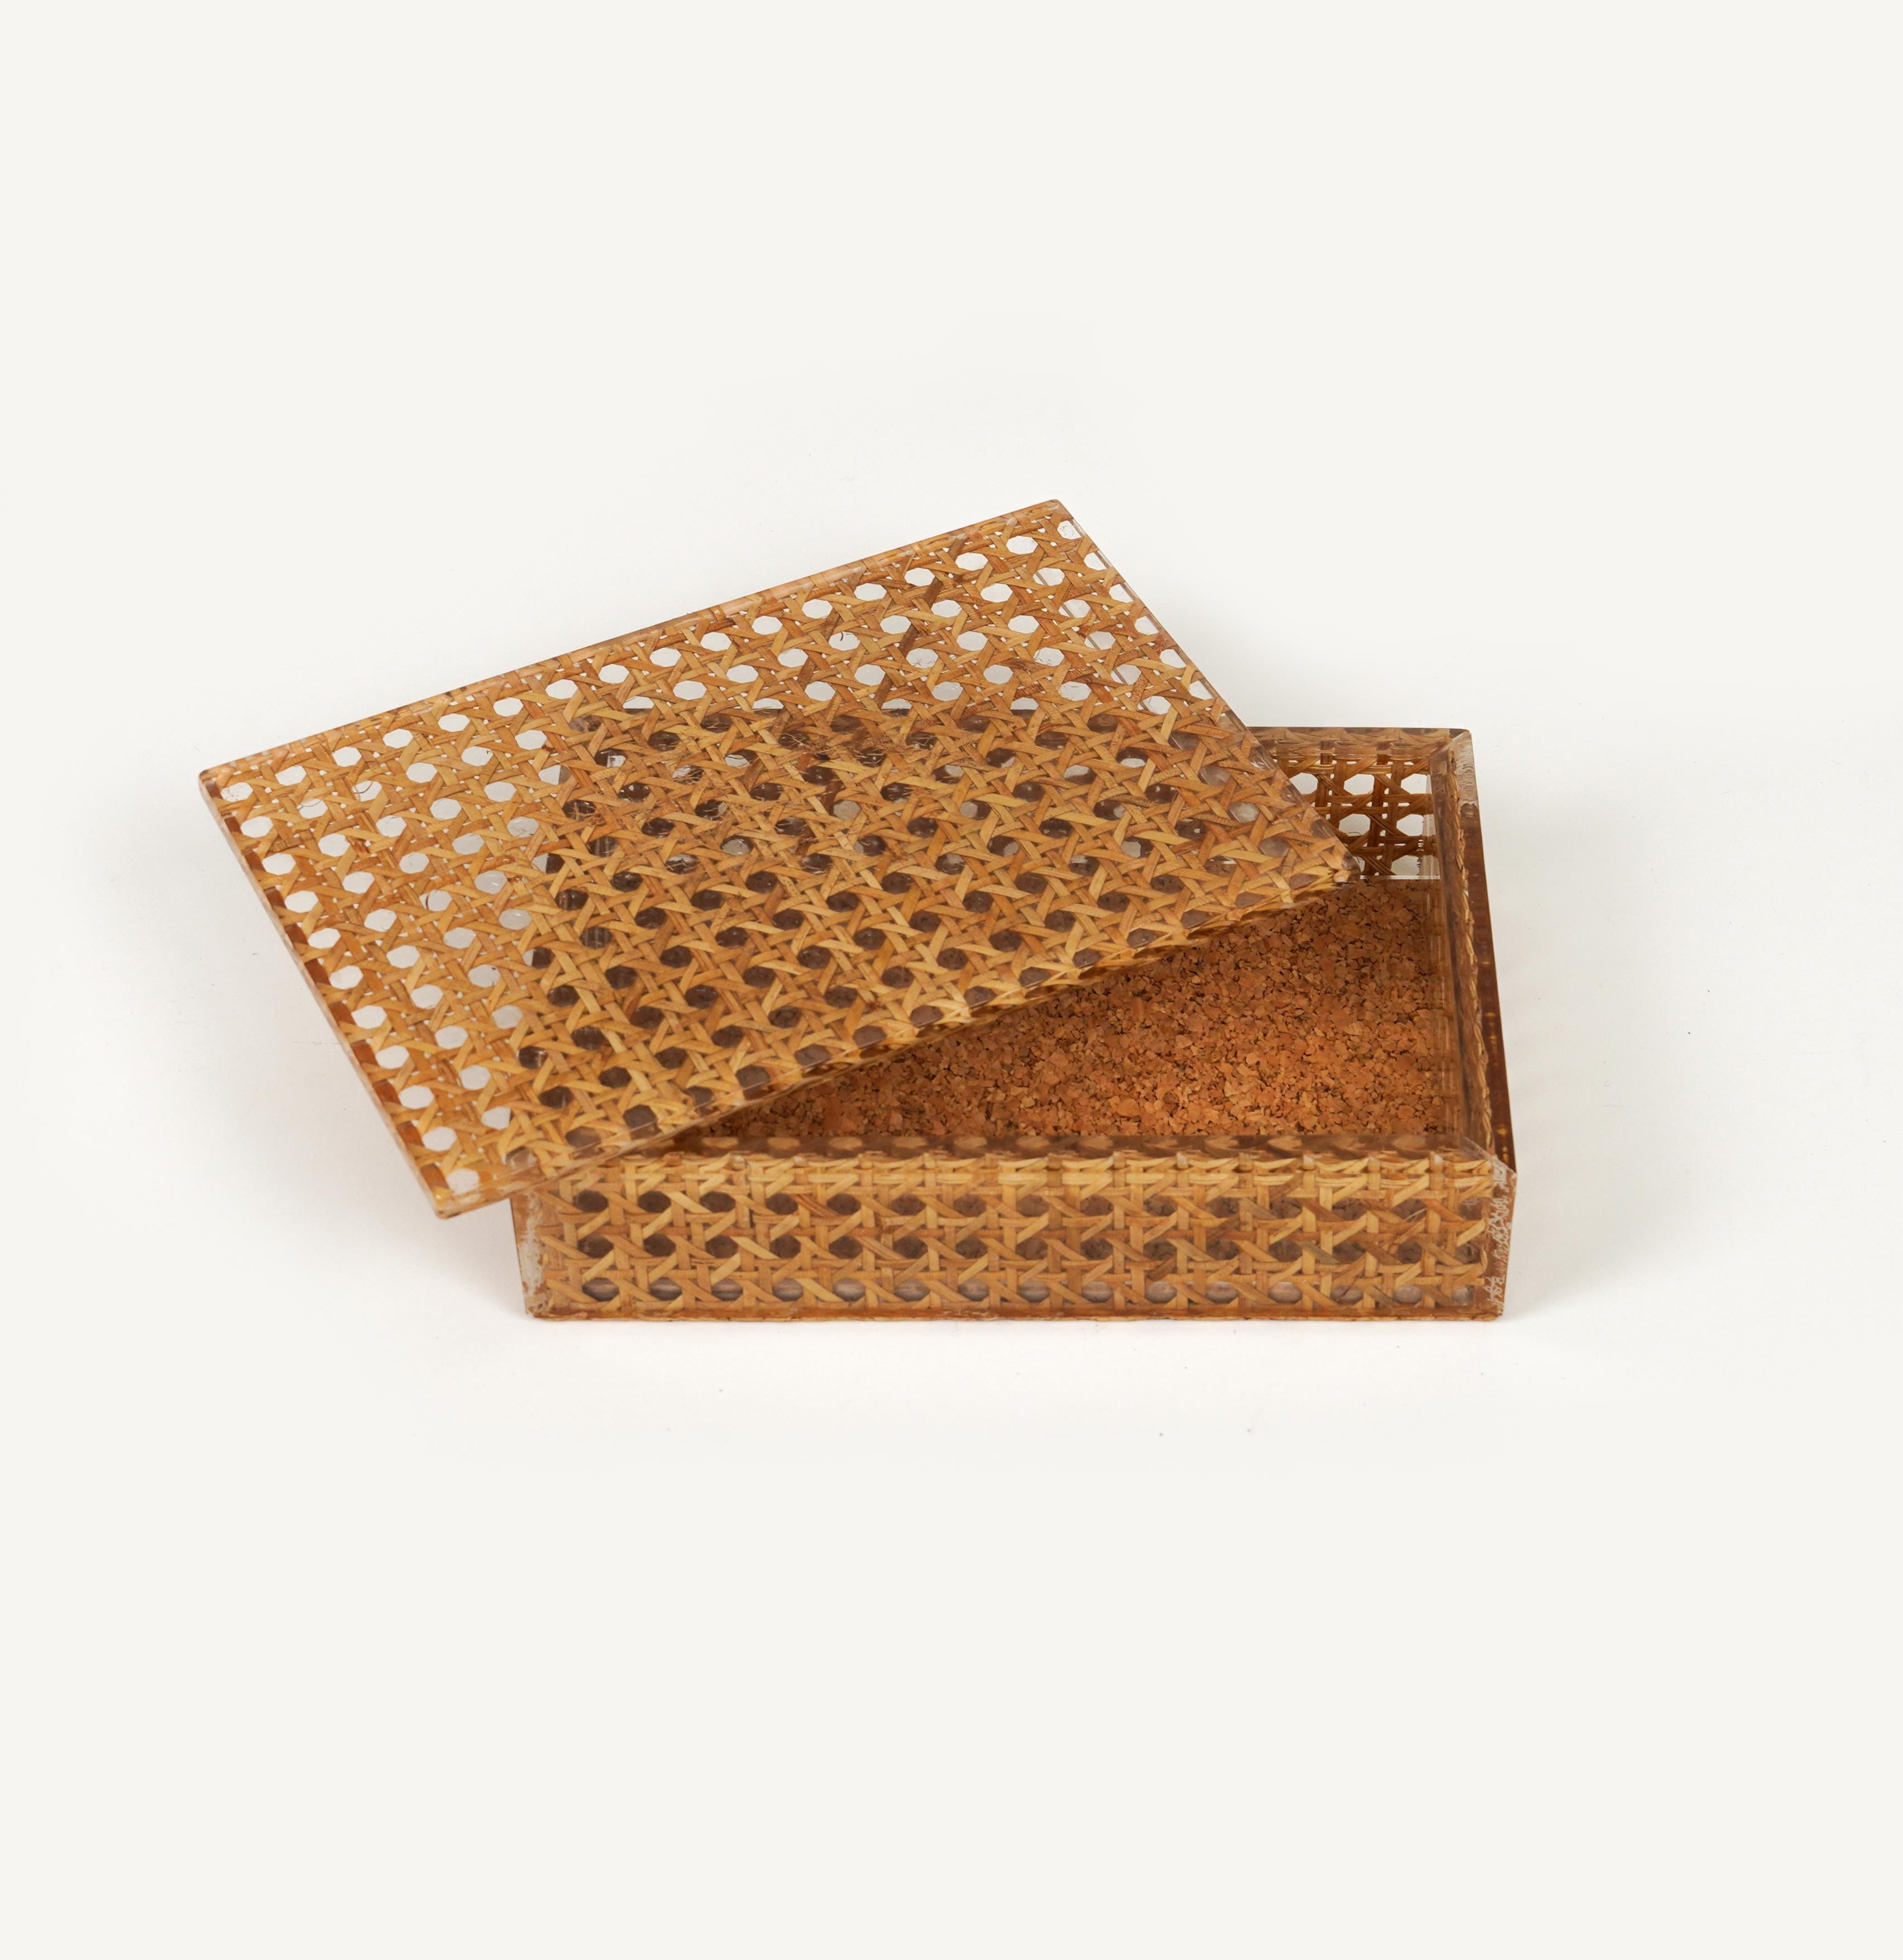 Wicker Midcentury Box in Rattan, Lucite and Cork Christian Dior Style, Italy 1970s For Sale